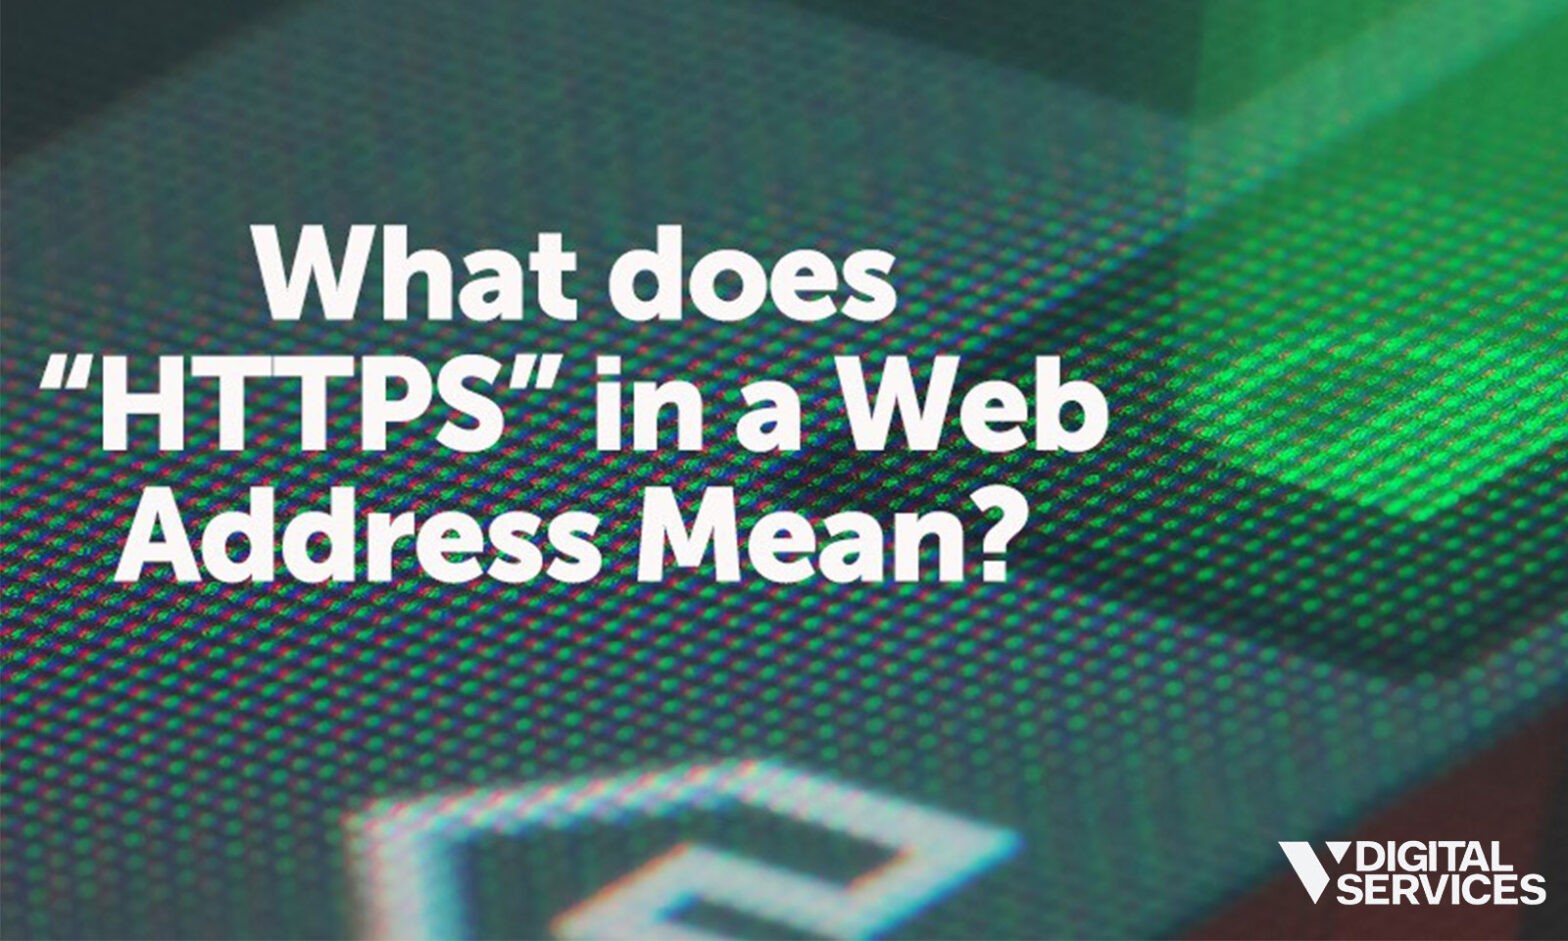 What does “HTTPS” in a web address mean?